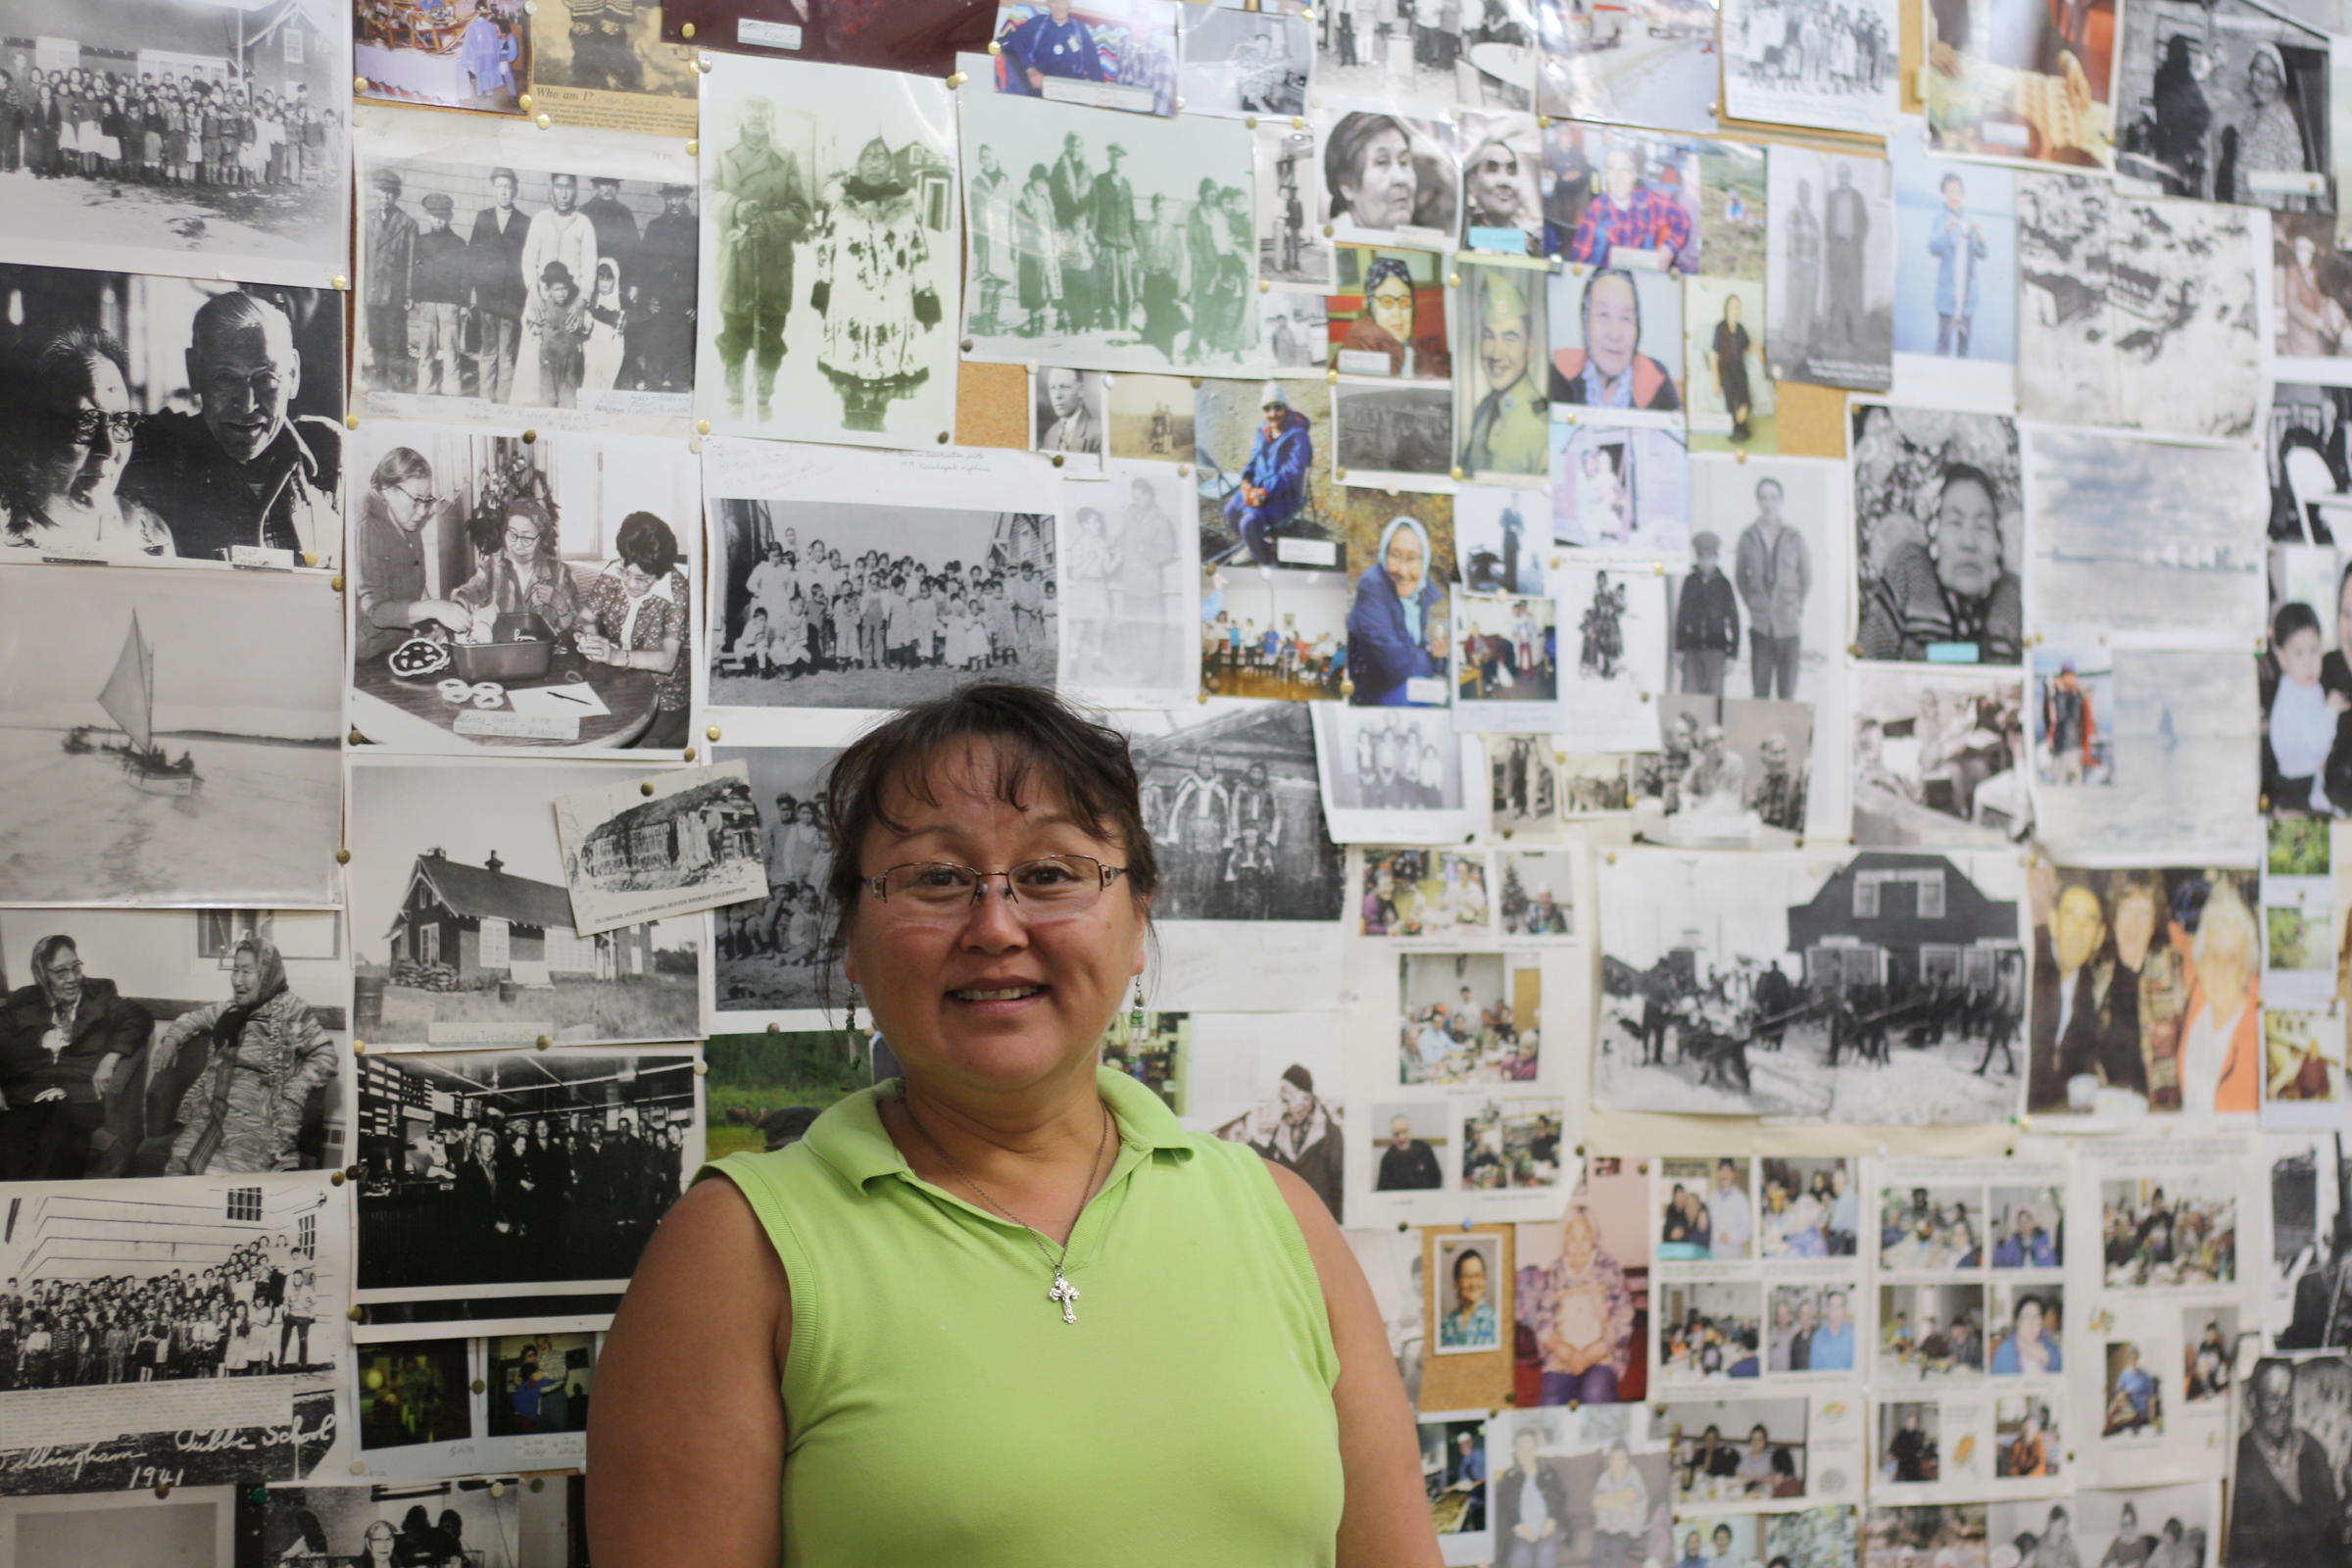 Dillingham Senior Center director Ida Noonkesser stands before a board of memories. Photos of community elders are displayed from years past. Noonkesser was recently recognized for 17 years of service at the center. (Photo by Zoey Laird/KDLG)